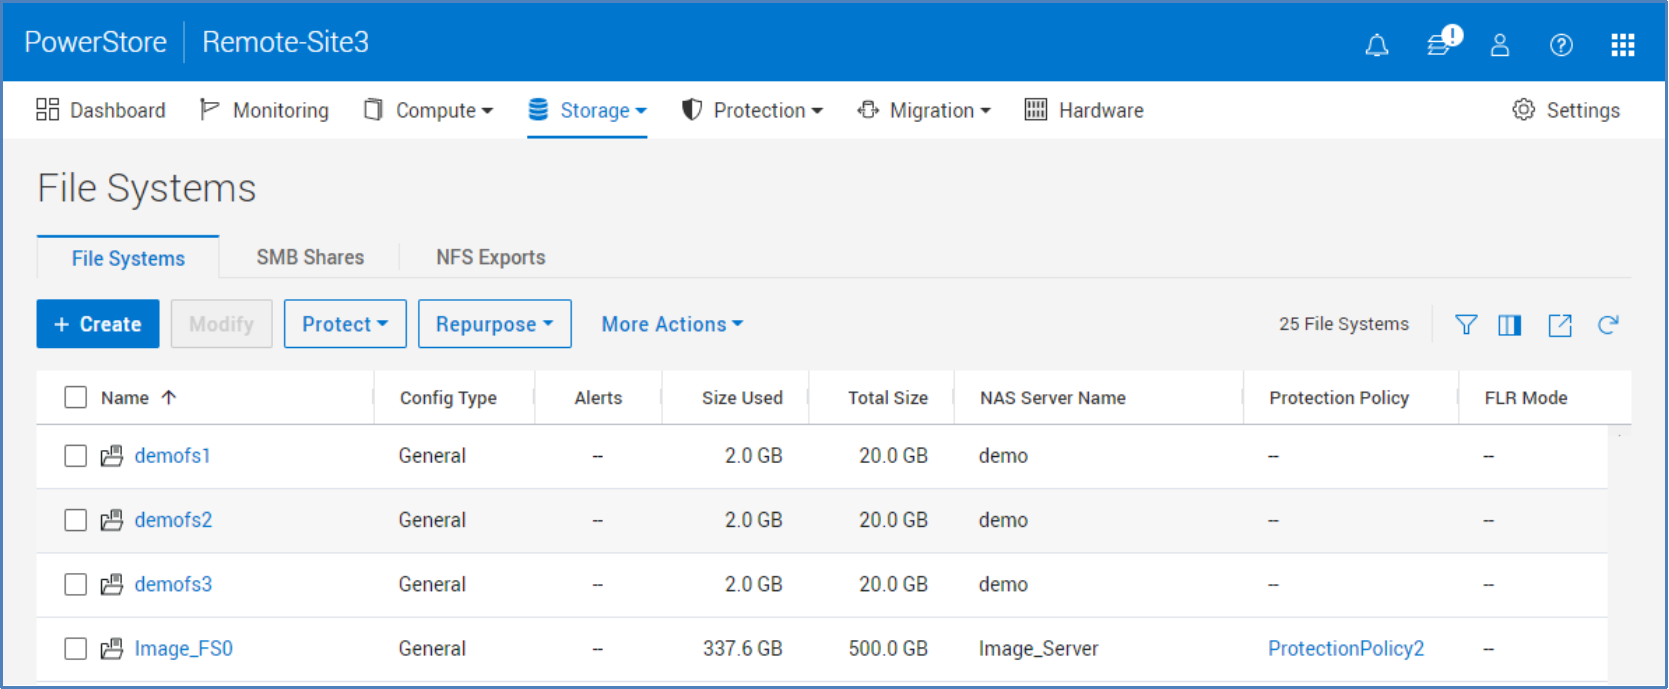 After a NAS Server has been created, File Systems can be created on the File Systems page. You can manage SMB Shares and NFS Exports from the other tabs on this page.